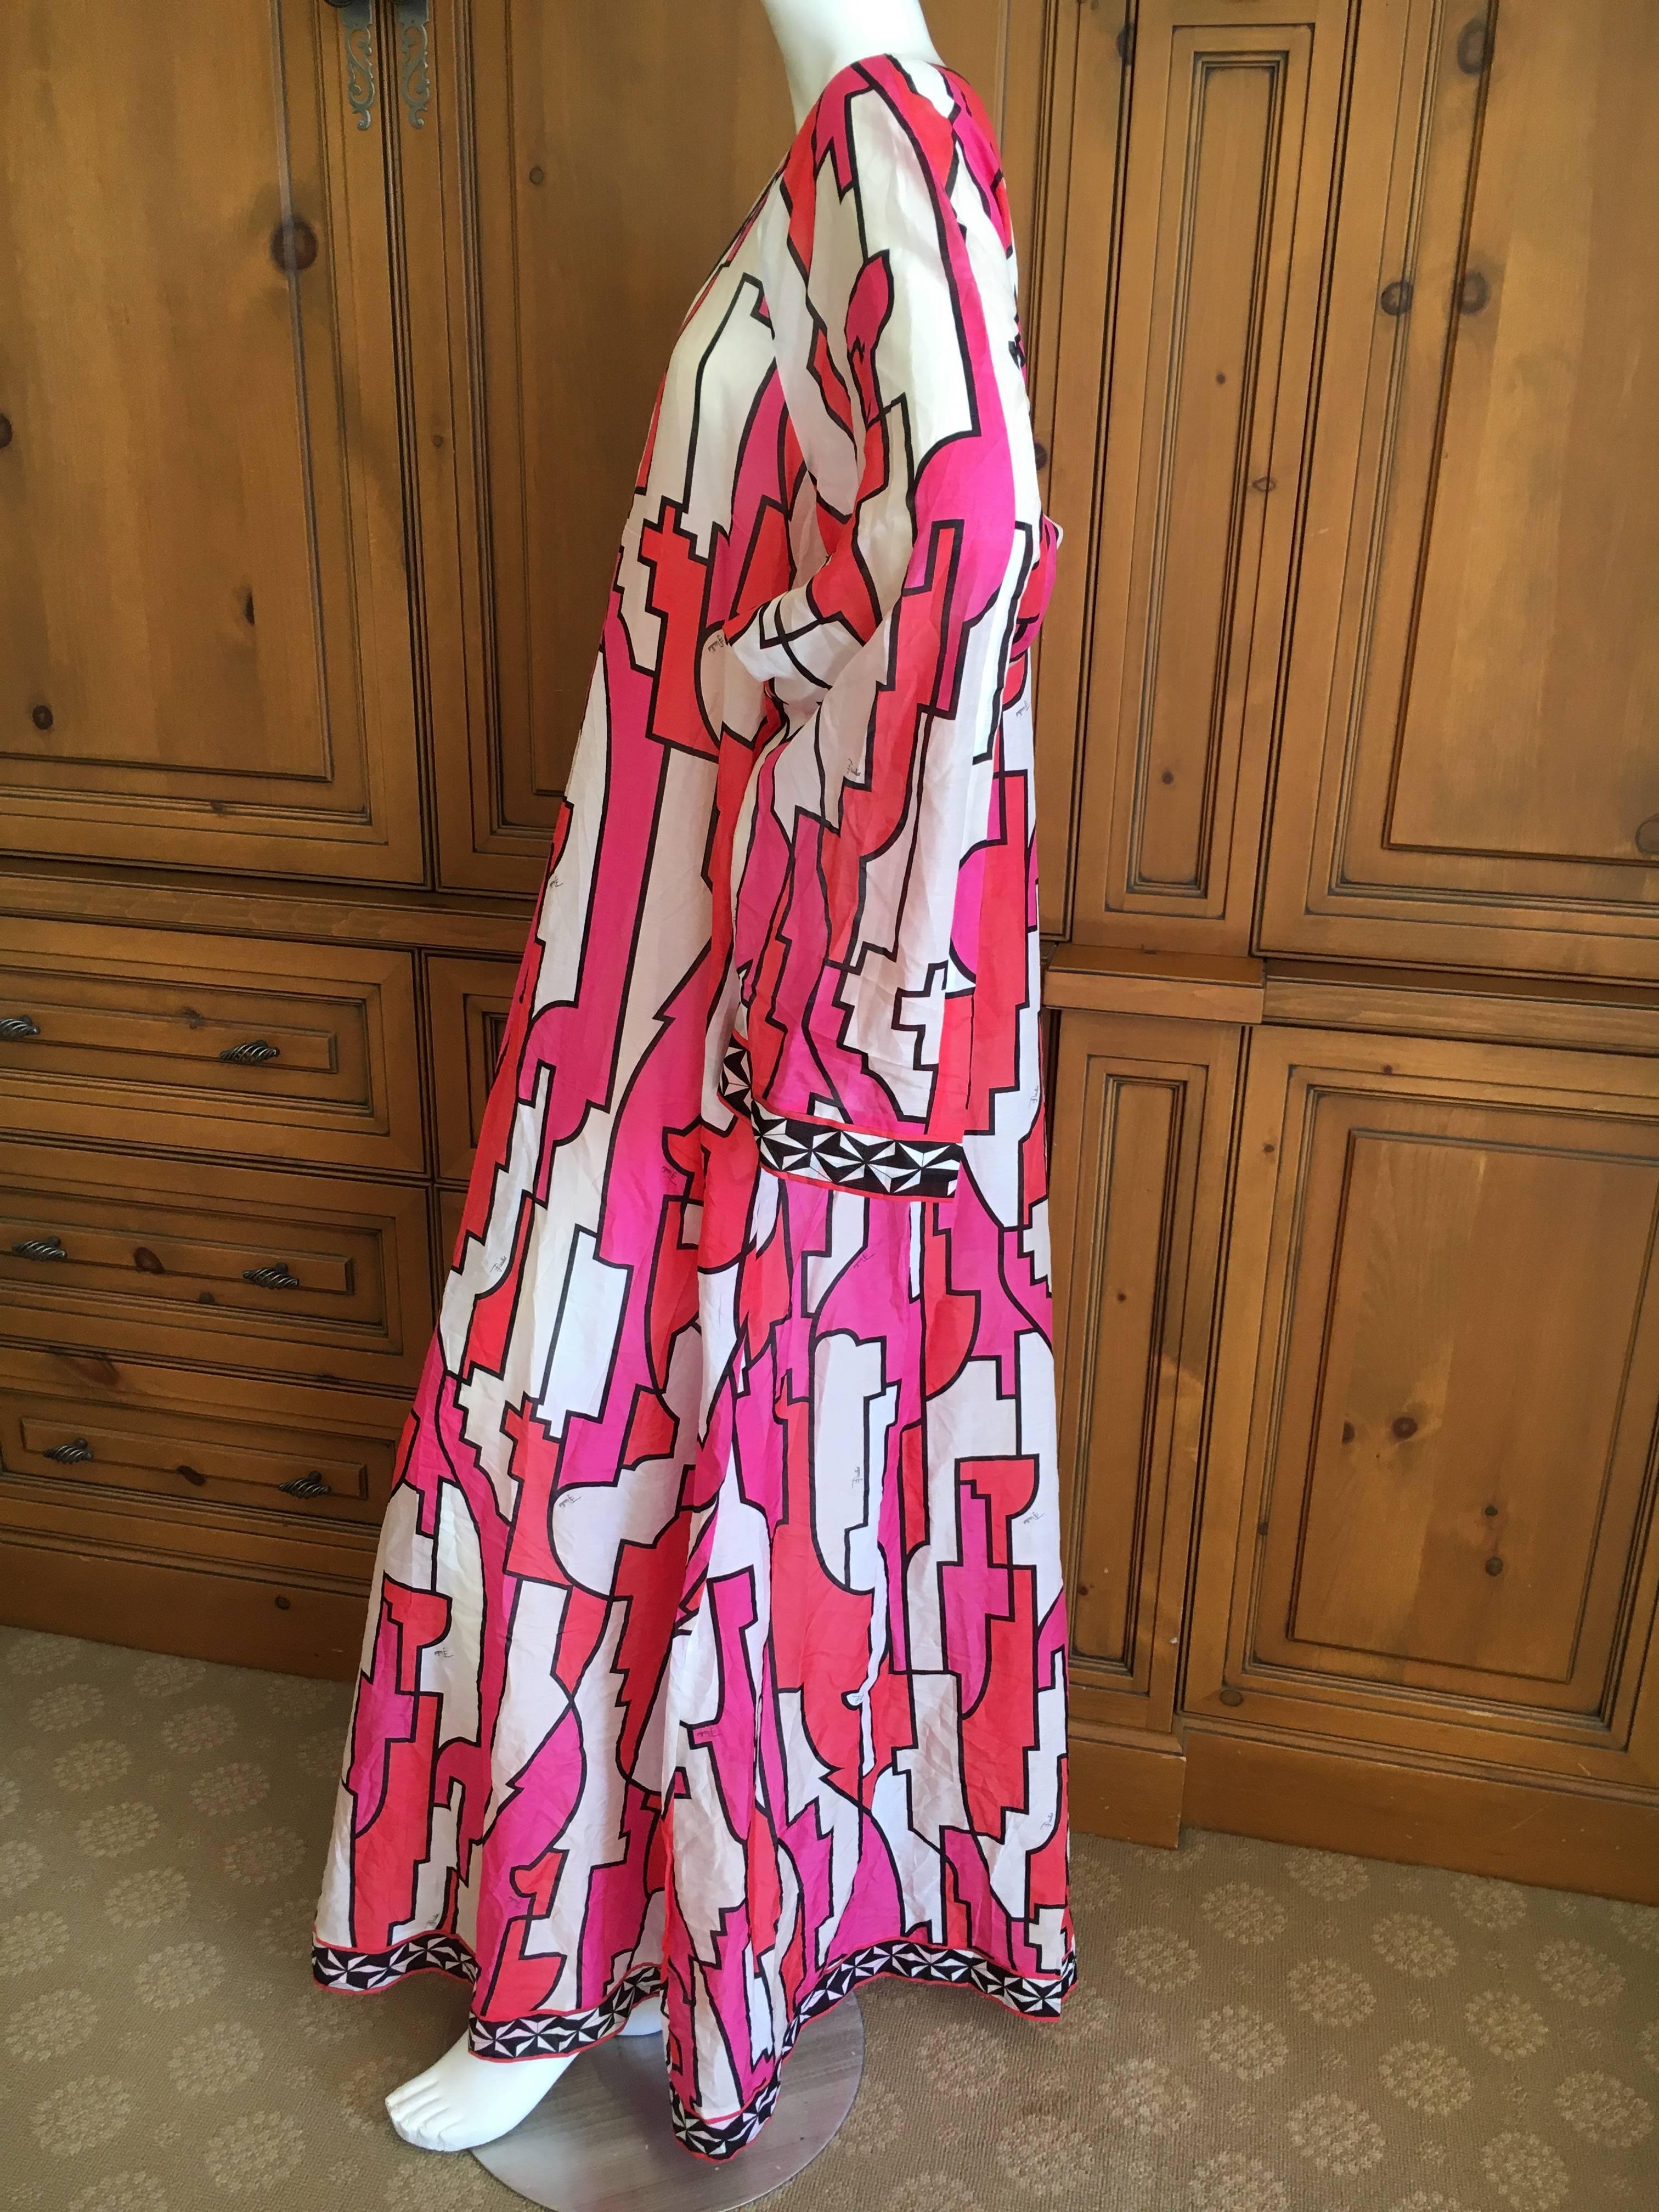 Emilio Pucci Sheer Cotton Caftan Dress In Excellent Condition For Sale In Cloverdale, CA